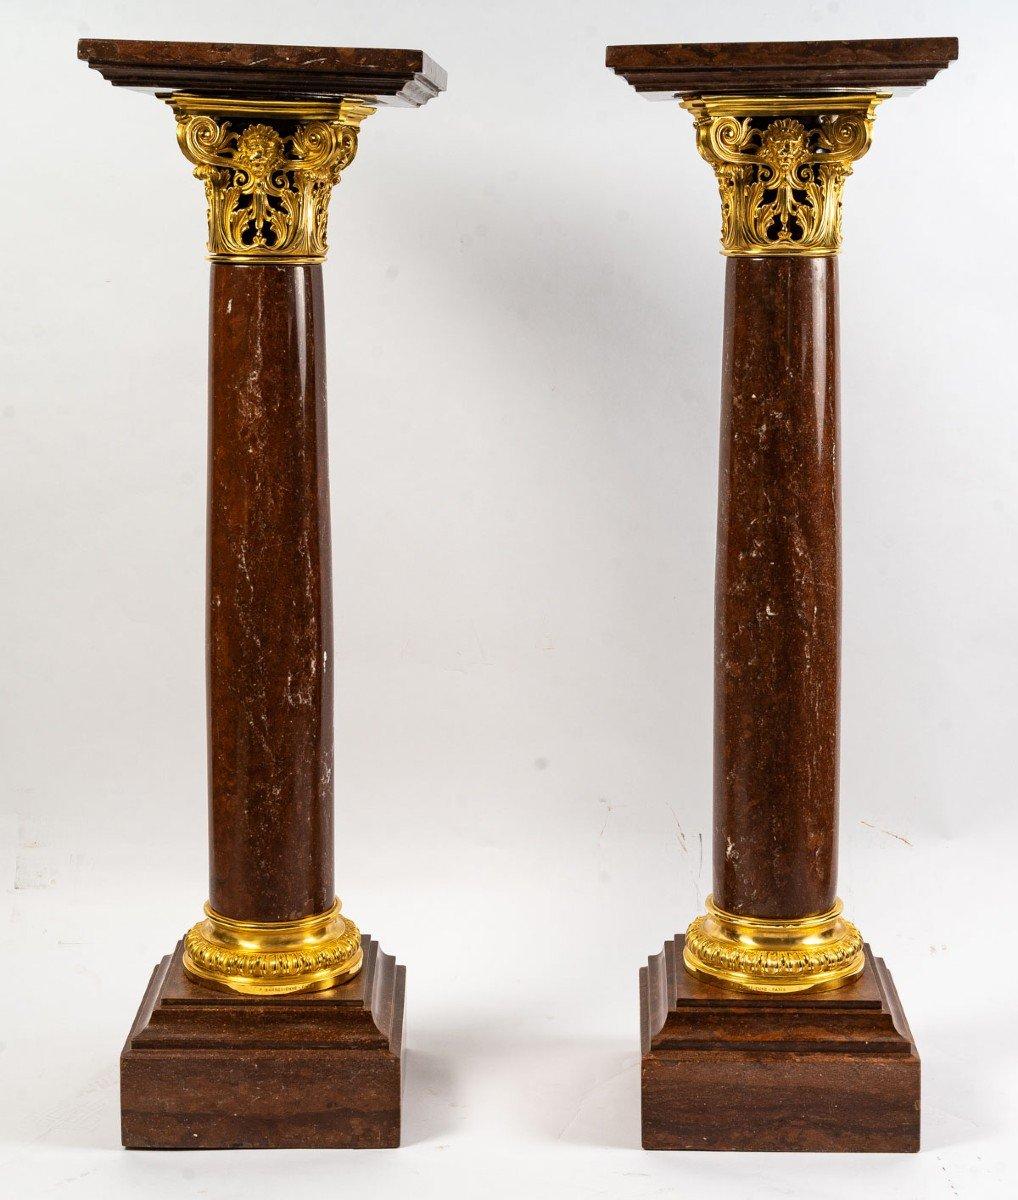 A pair of columns and candelabra vase 19th century
Pair of columns in griotte red marble signed by Barbedienne
with gilt bronze trim
Pair of red griotte marble vases and gilt bronze candelabras
Napoleon III style
End of the 19th century
Vases